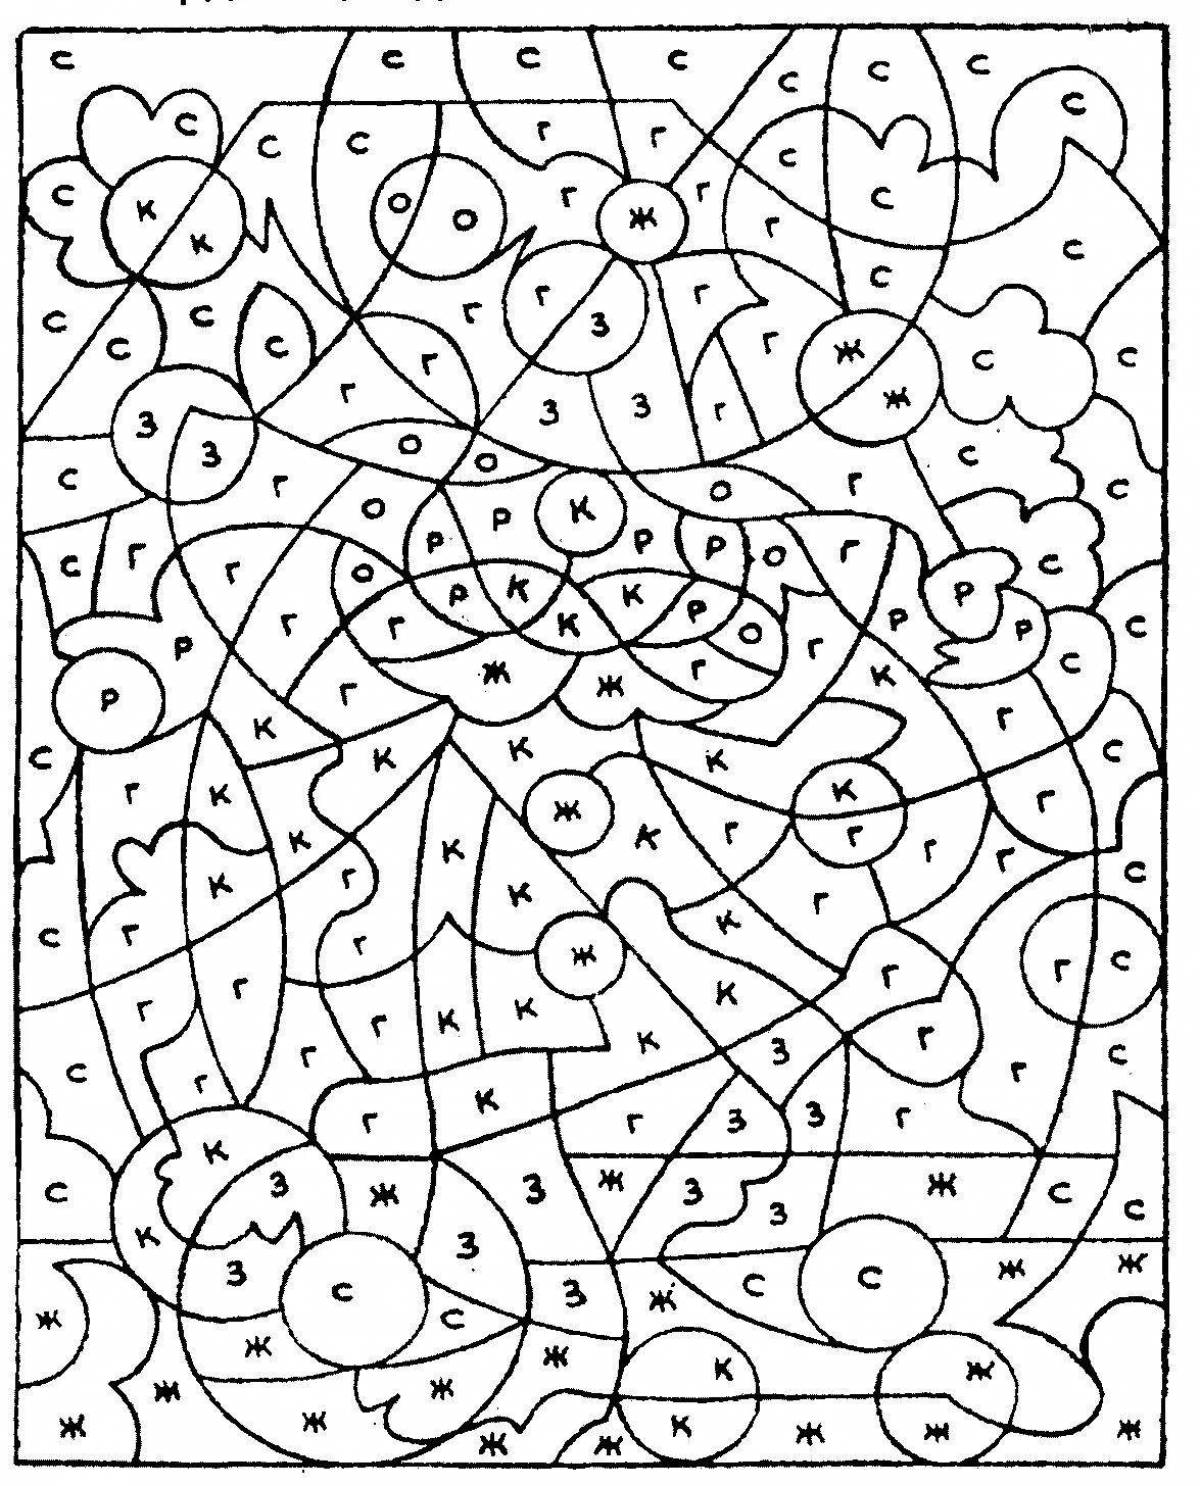 Nice mindfulness coloring book